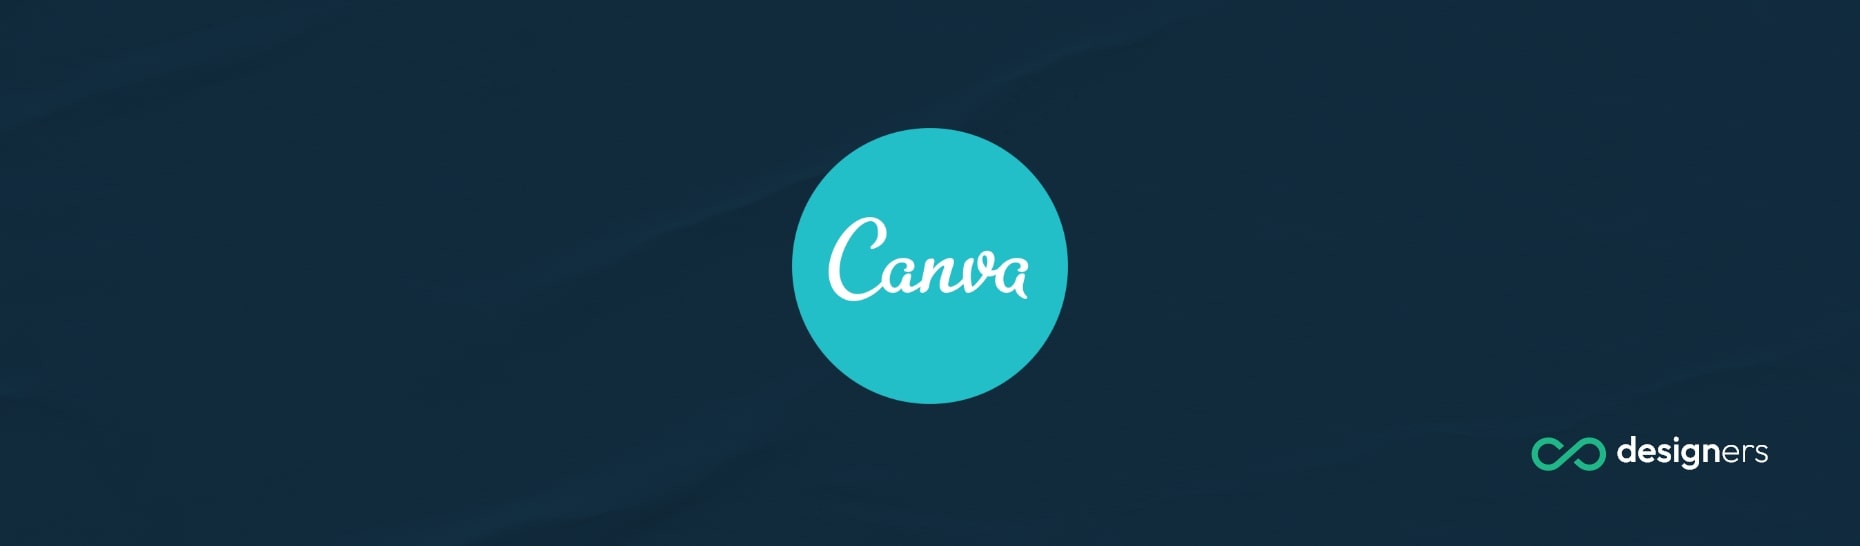 What Is Canva Built With?